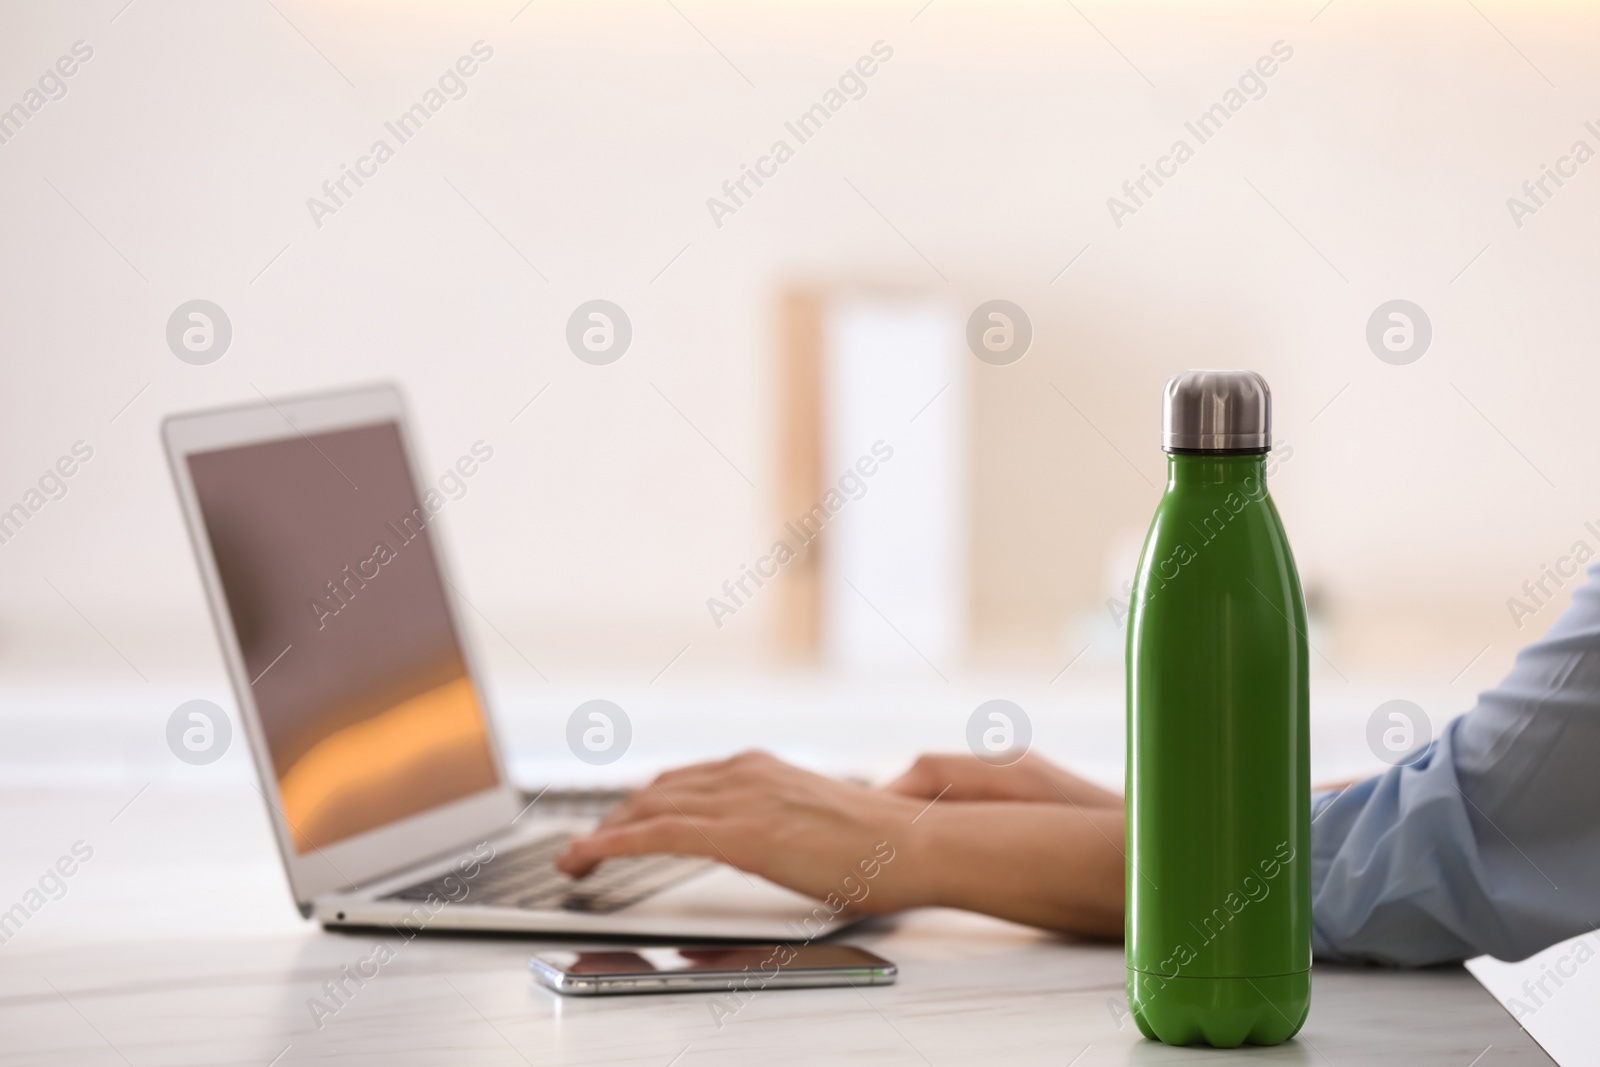 Photo of Woman with thermo bottle working at table in modern office, closeup